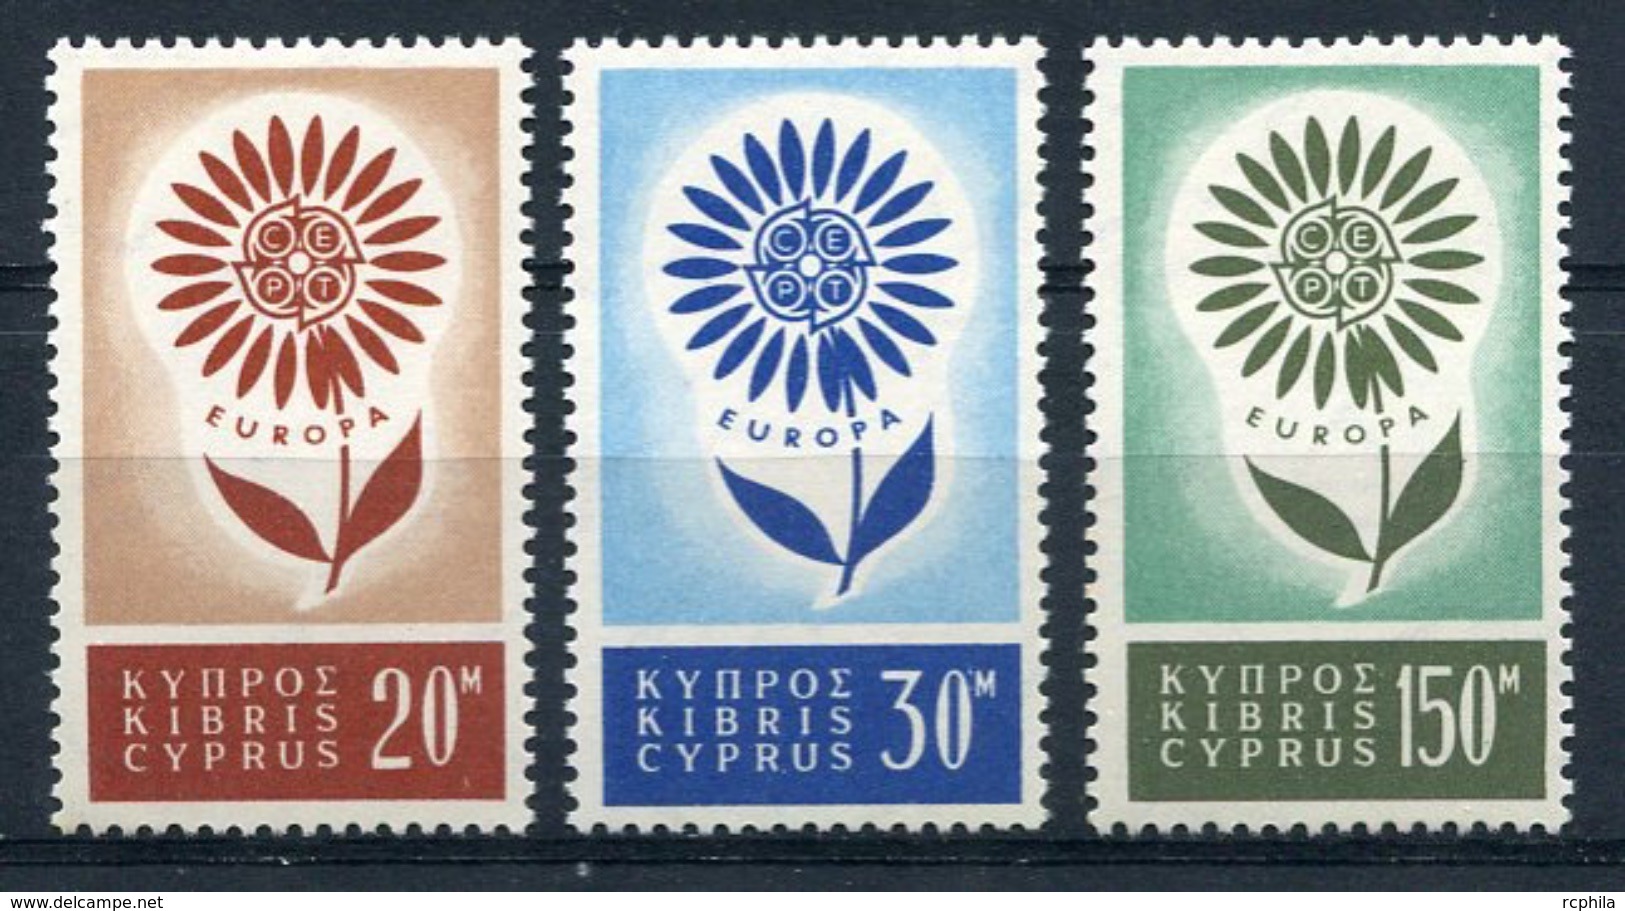 RC 8021 CHYPRE CYPRUS 232 / 234 - SERIE EUROPA 1964 COMPLÈTE COTE 60€ NEUF ** TB - Cipro (...-1960)